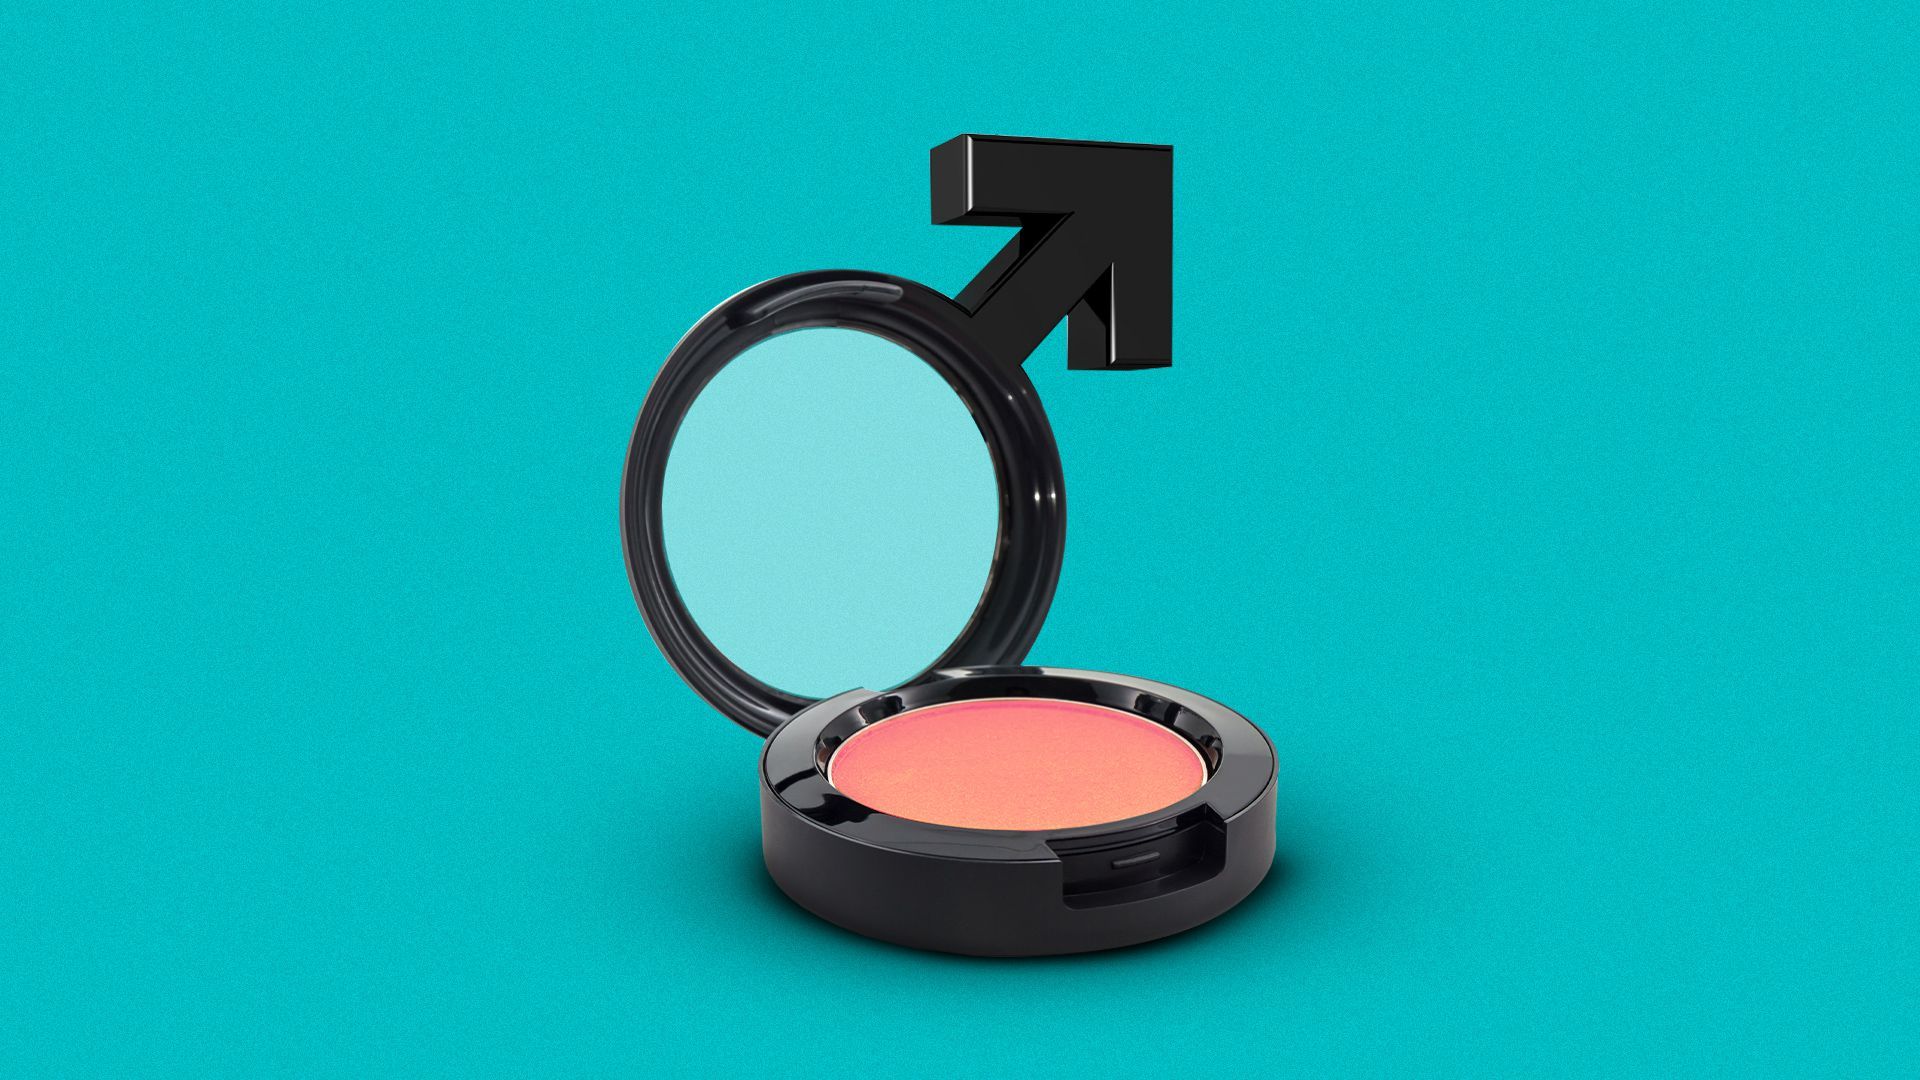 Illustration of a makeup compact with the top area of the compact forming a male symbol. 